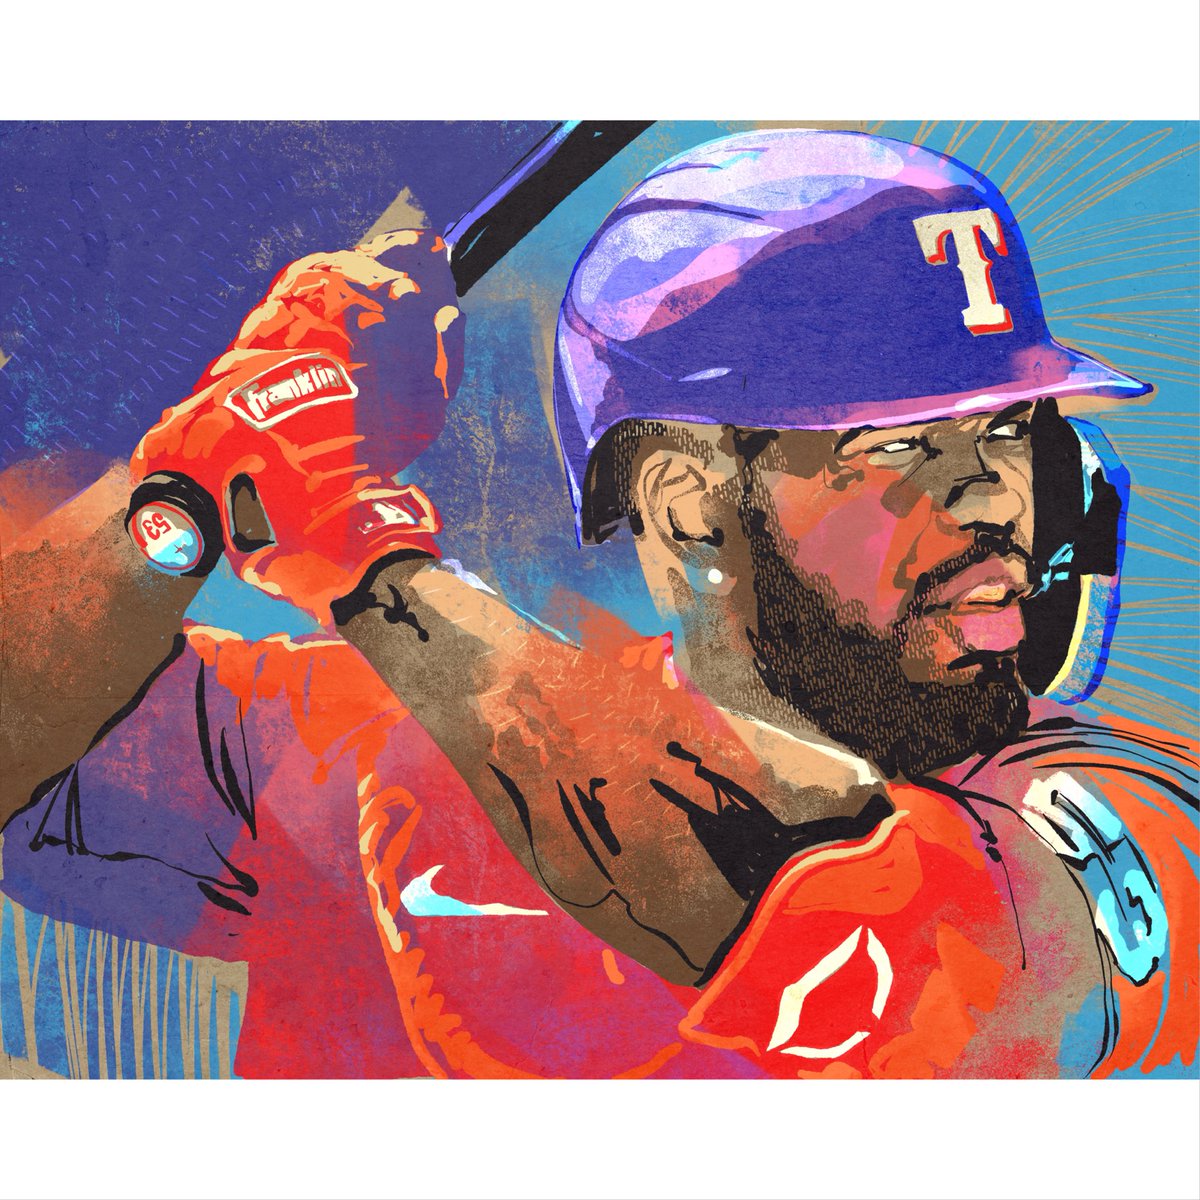 This Day in Baseball History: April 22, 2023 - Adolis García has a career game in leading the Rangers to an 18 - 3 win over the Athletics. He homers three times in the first five innings, each time with a man on base. #tripleplaydesign #design #adolisgarcia #texasrangers